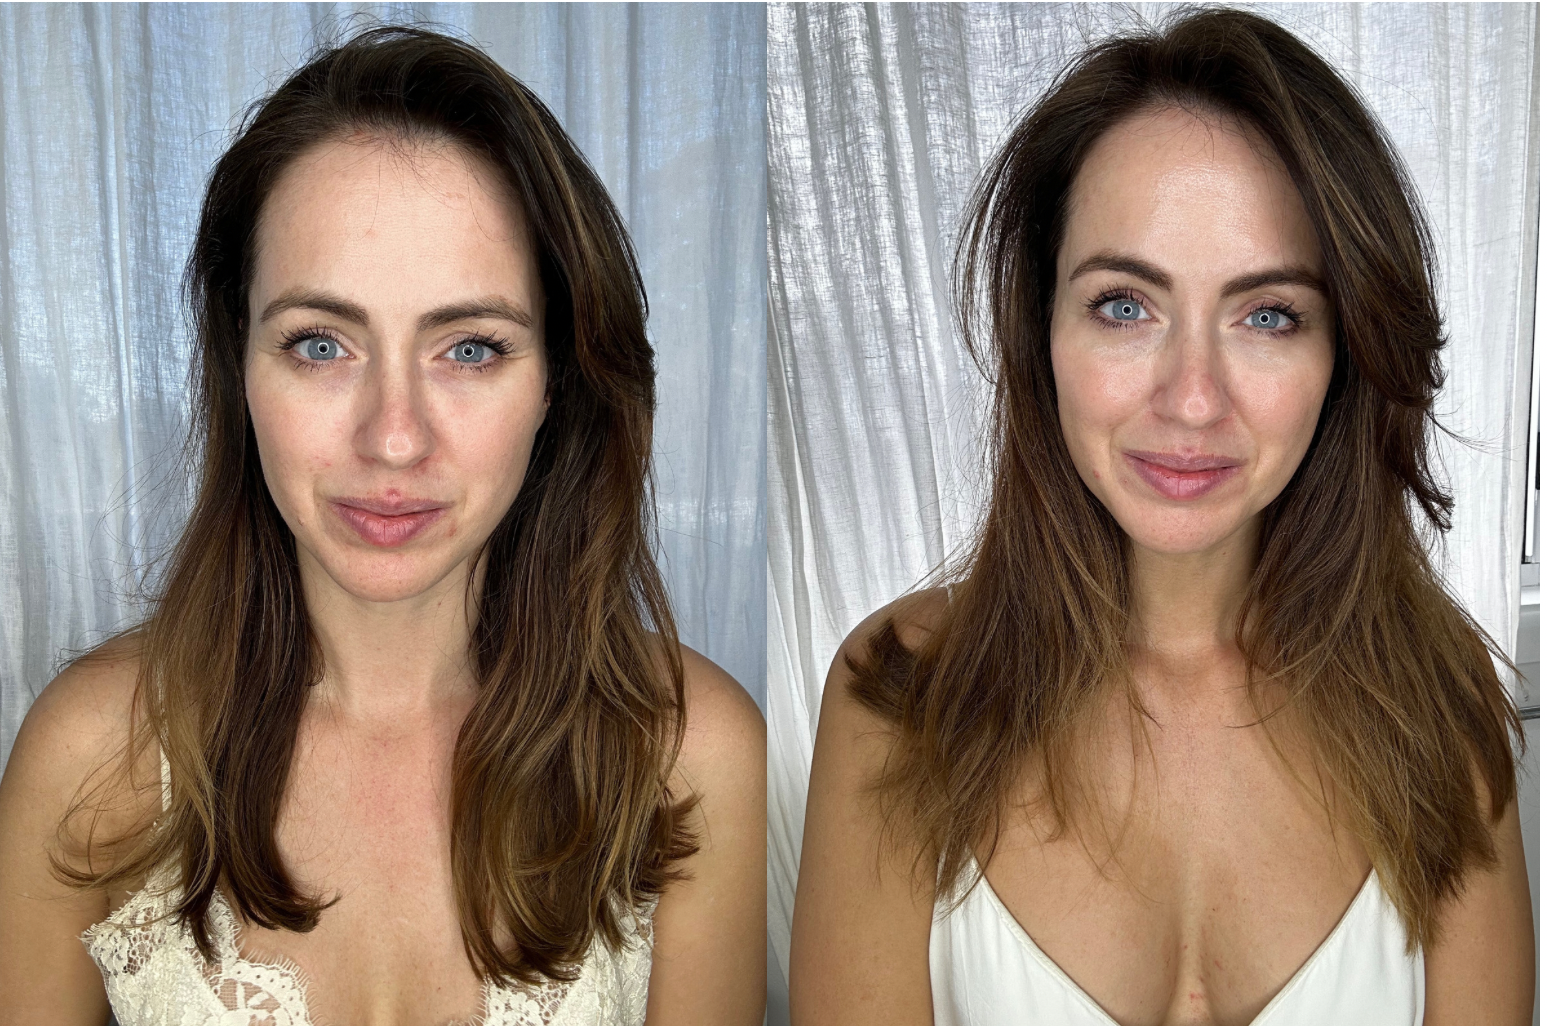 Sigourney before and after qure micro-infusion, micro-infusion, micro-infusion facial, microinfusion treatment, microneedling, microinfusion, microinfusion